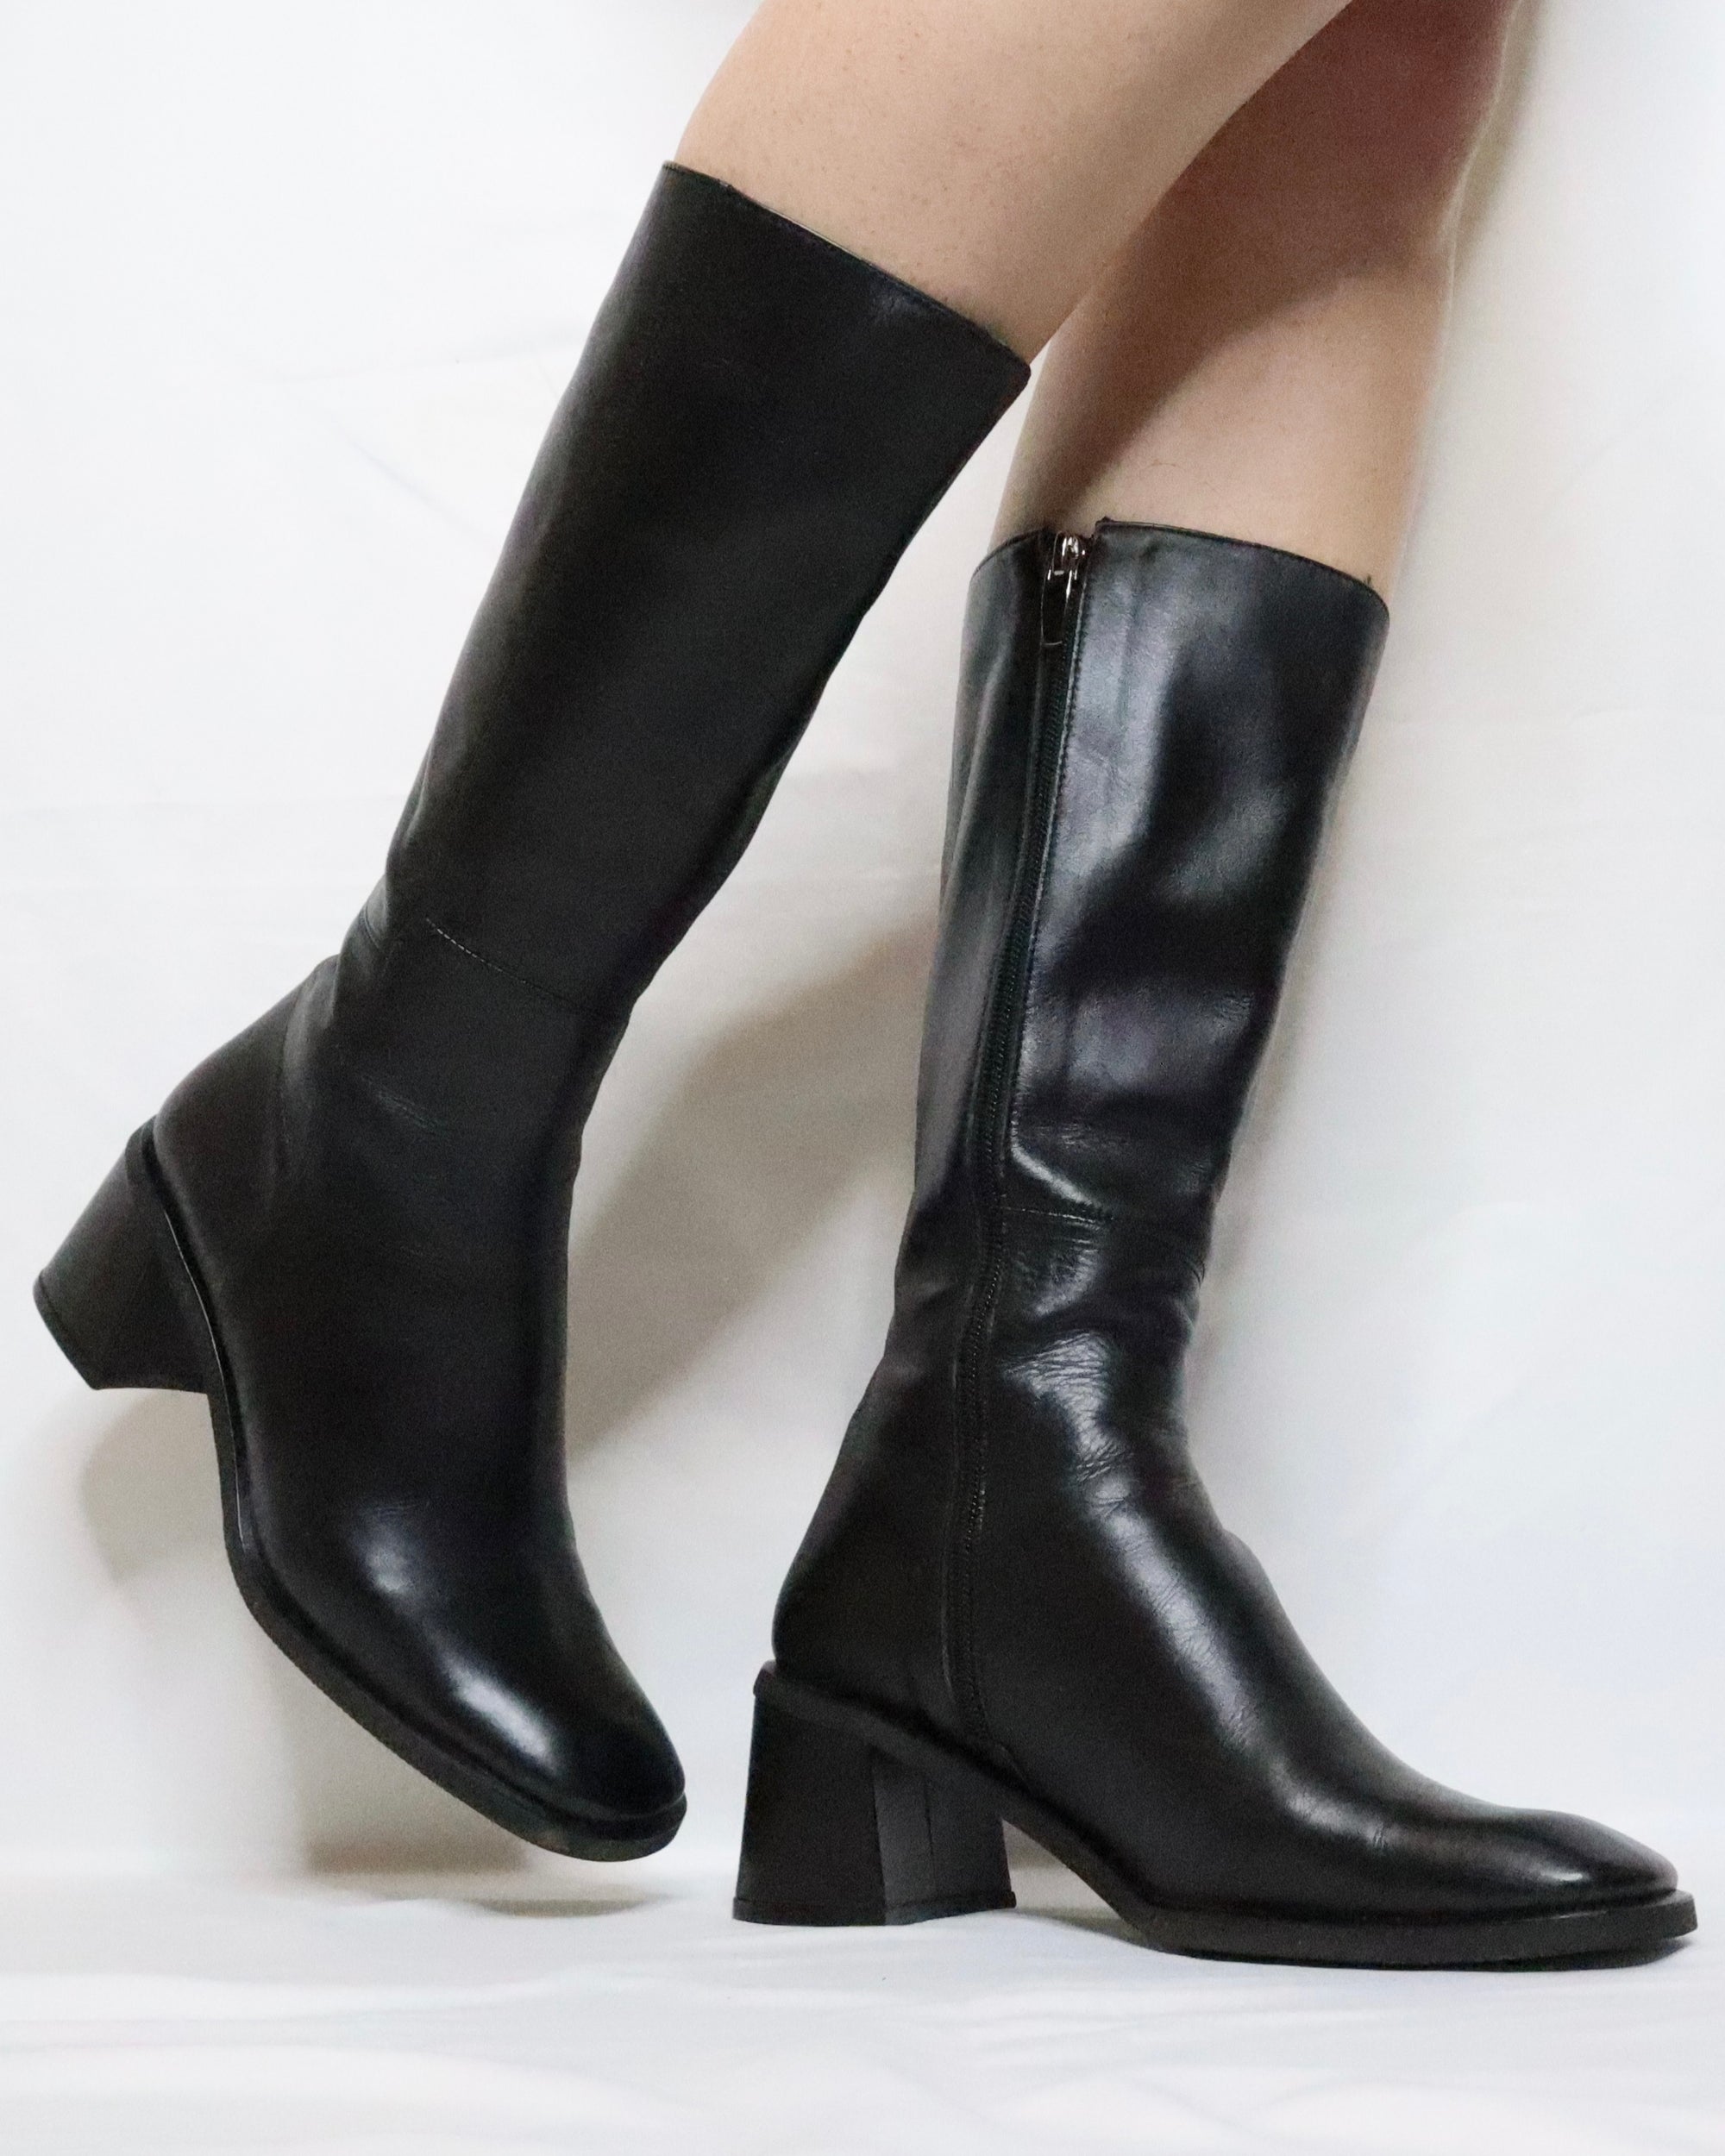 Black Leather Knee High Boots (6.5 US) 